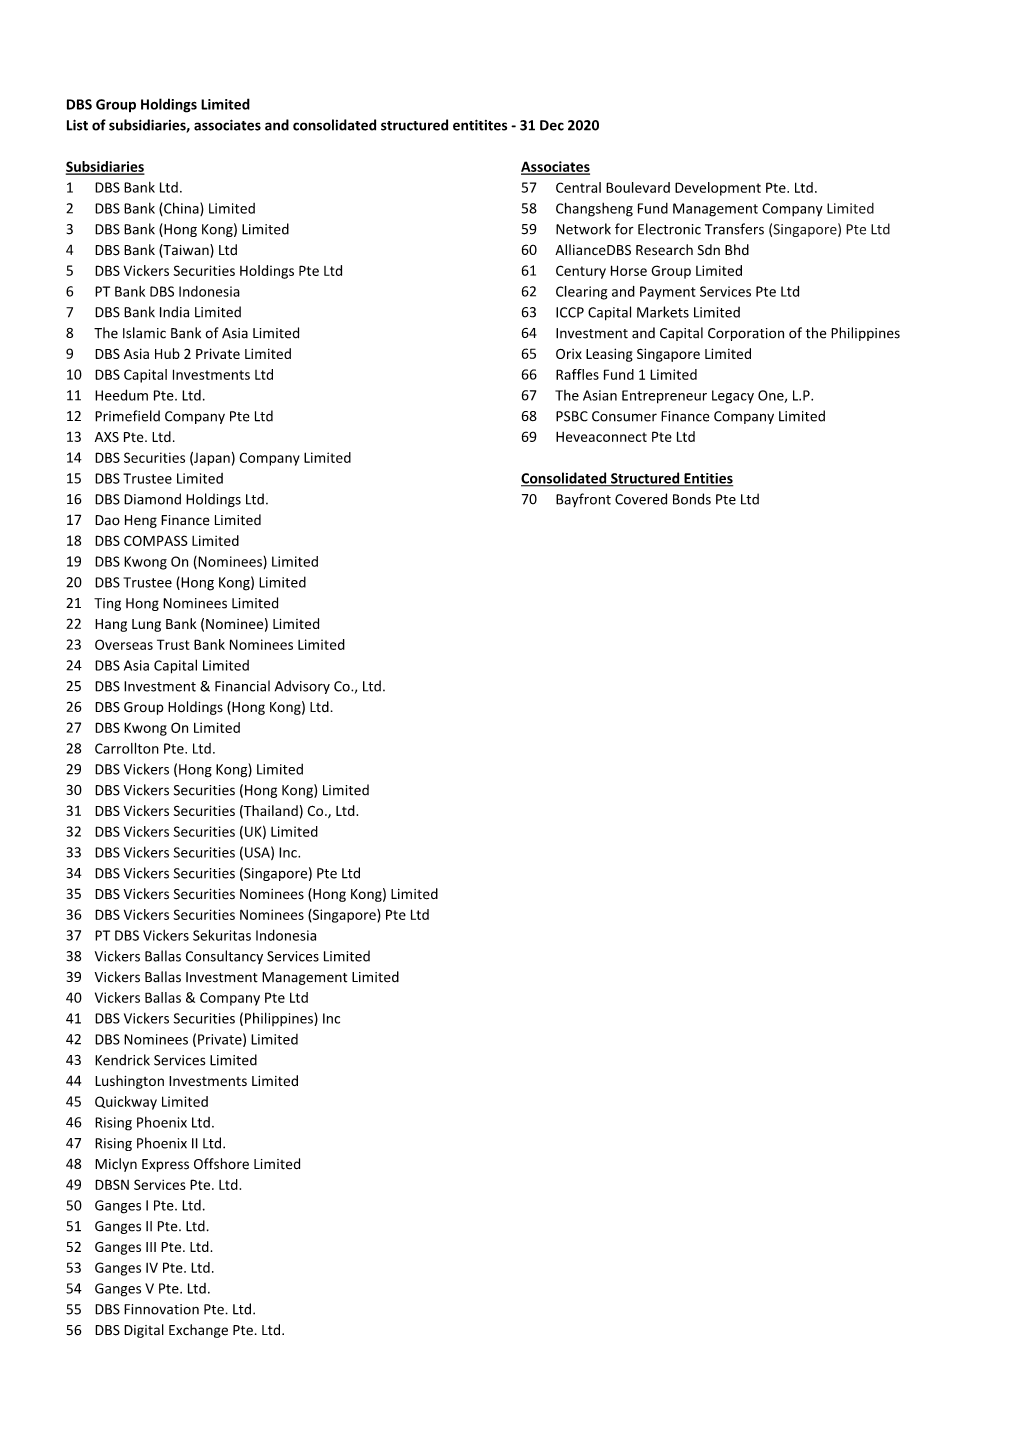 DBS Group Holdings Limited List of Subsidiaries, Associates and Consolidated Structured Entitites - 31 Dec 2020